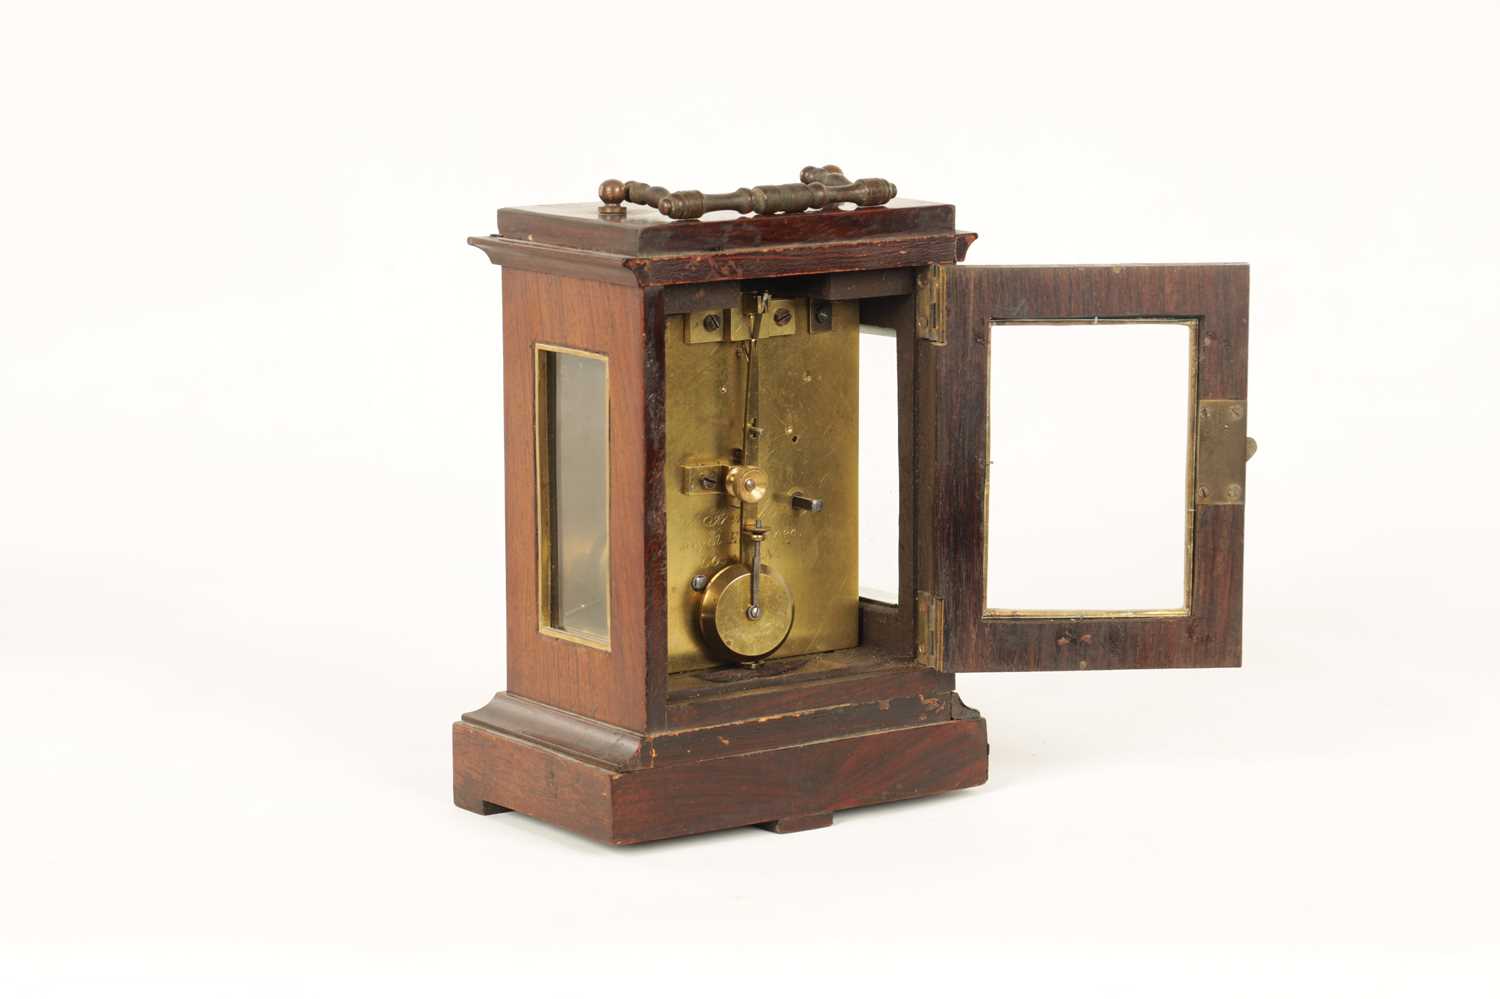 FRENCH, ROYAL EXCHANGE, LONDON. A SMALL CARRIAGE STYLE ENGLISH FUSEE MANTEL CLOCK - Image 5 of 14